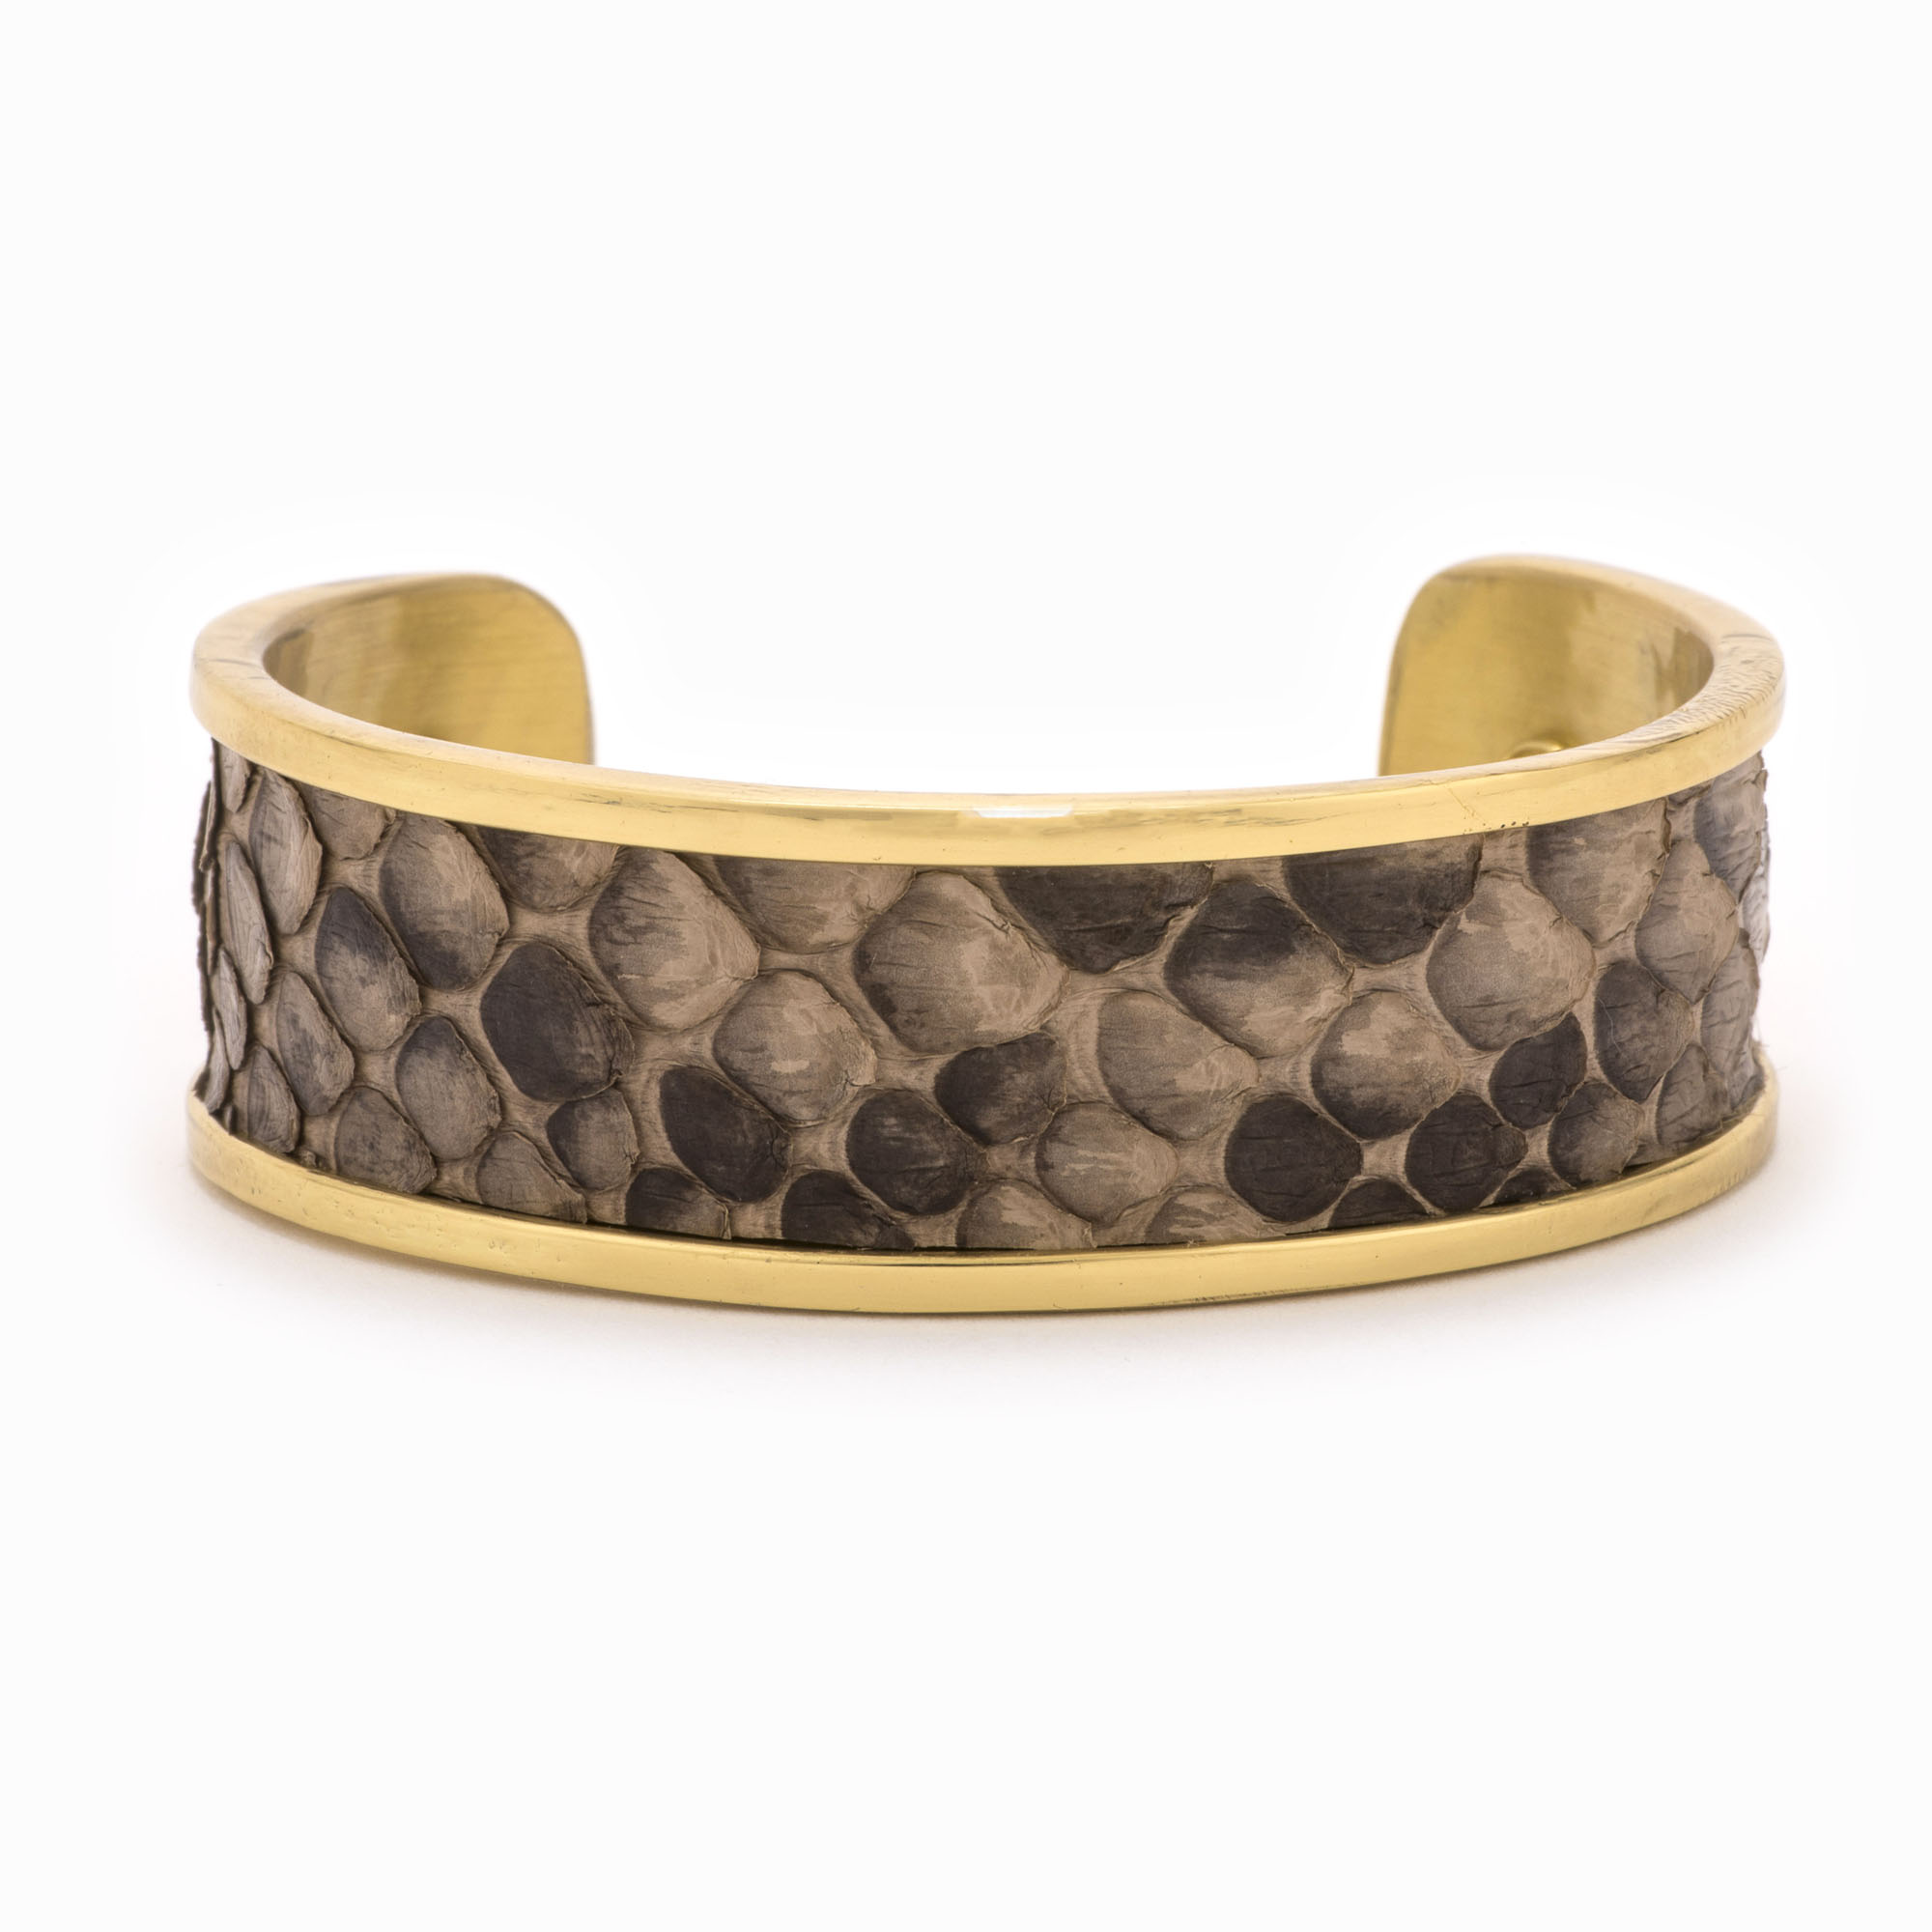 Featured image for “Medium Grey & Brown Gold Cuff”